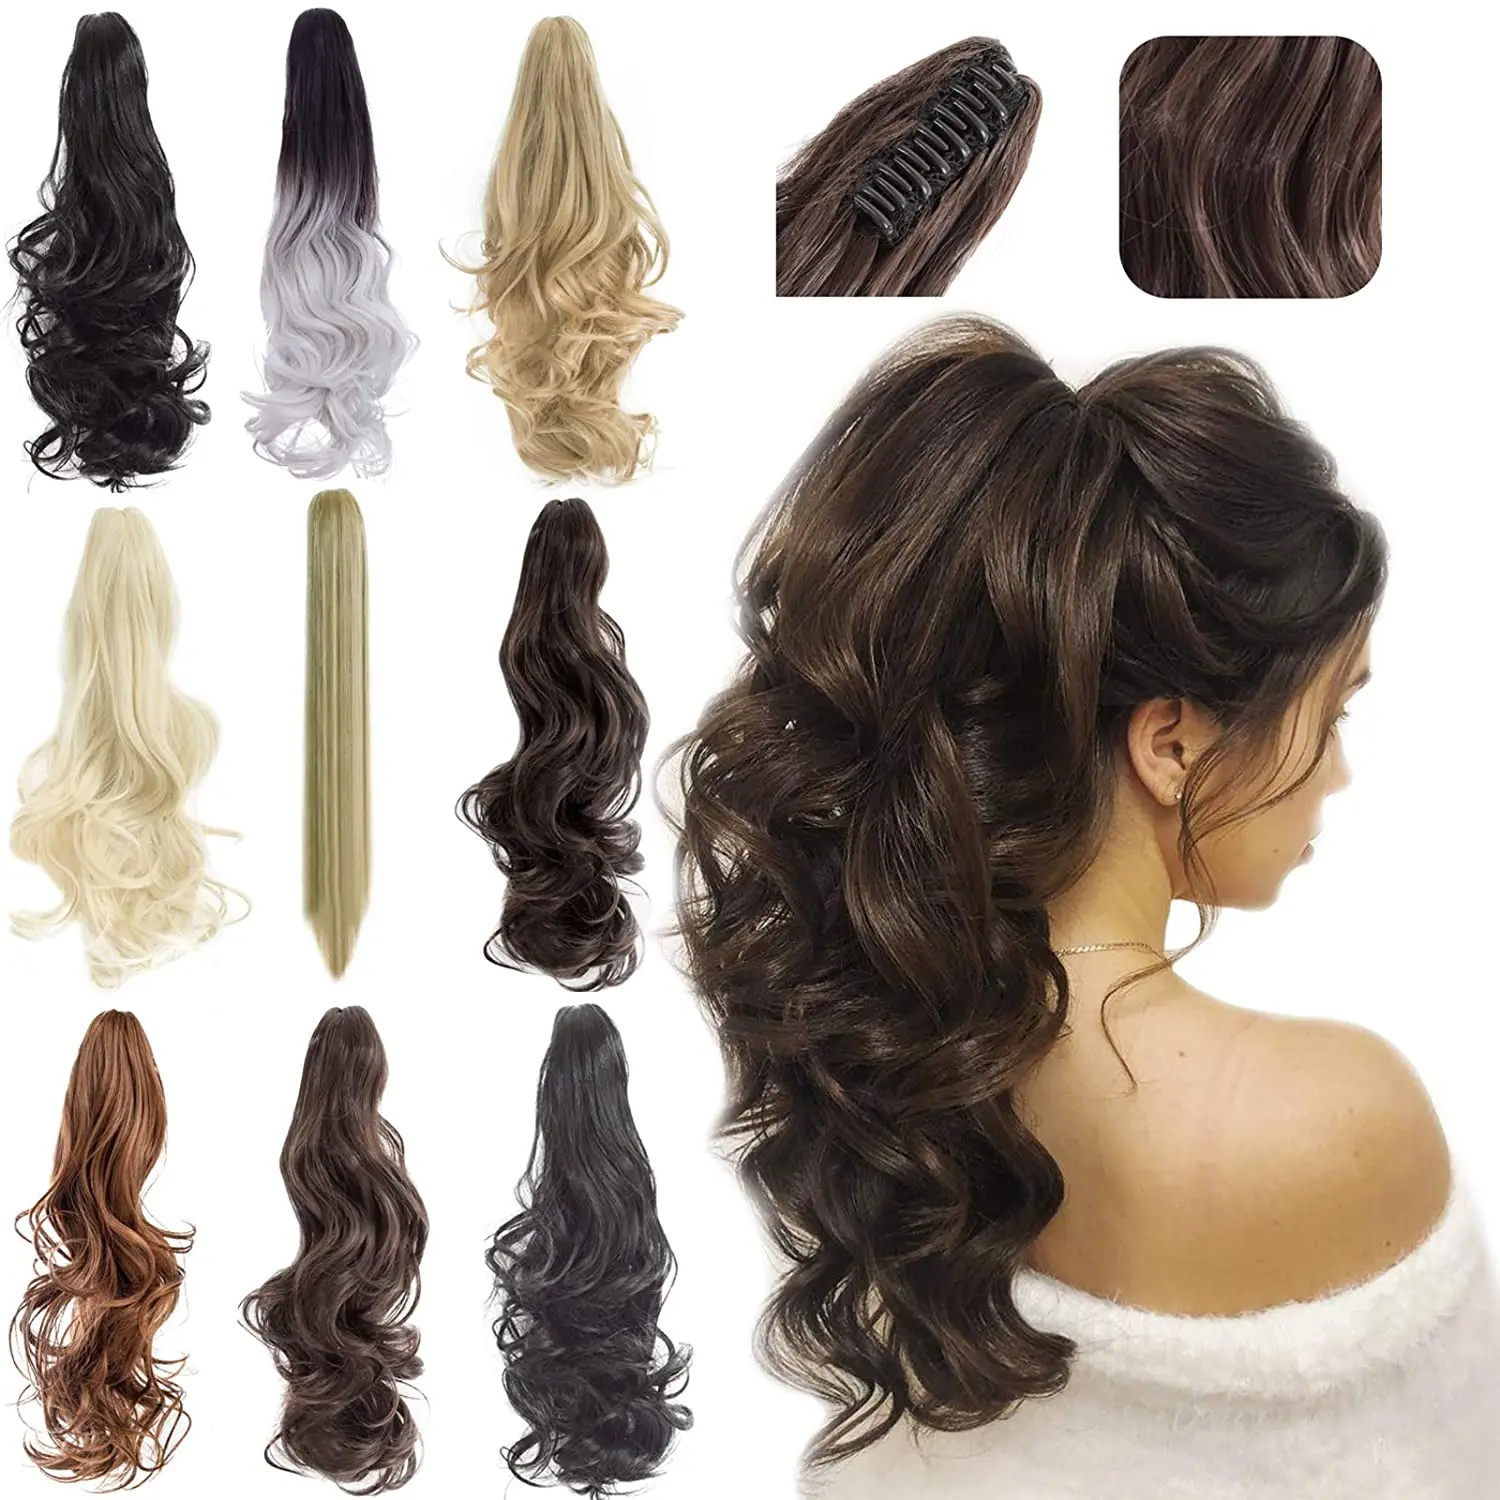 $1 Sample Clip On Claw Ponytail Hair Extension Synthetic Curly Brown  Ponytail Enxtension Hair For Women Pony Tail Hair Hairpiece - Buy Curly  Wavy Straight Long Pony Tails,Long Clip In Synthetic Ponytail